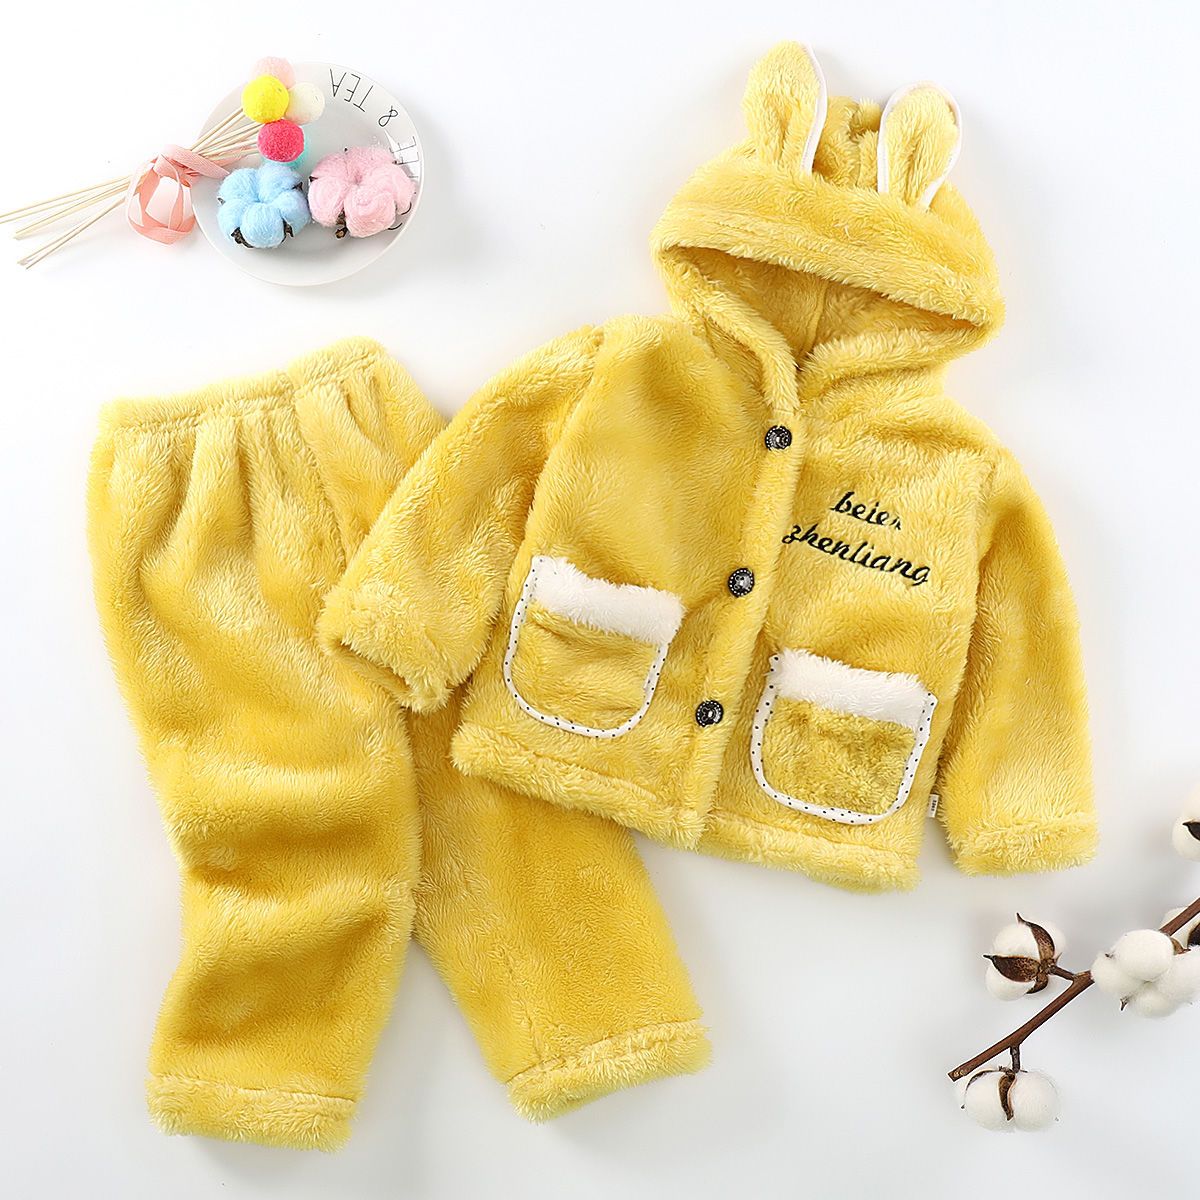 2021 new children's foreign style pajamas suit male and female baby small, medium and big children cute hooded spring and autumn models can be worn outside